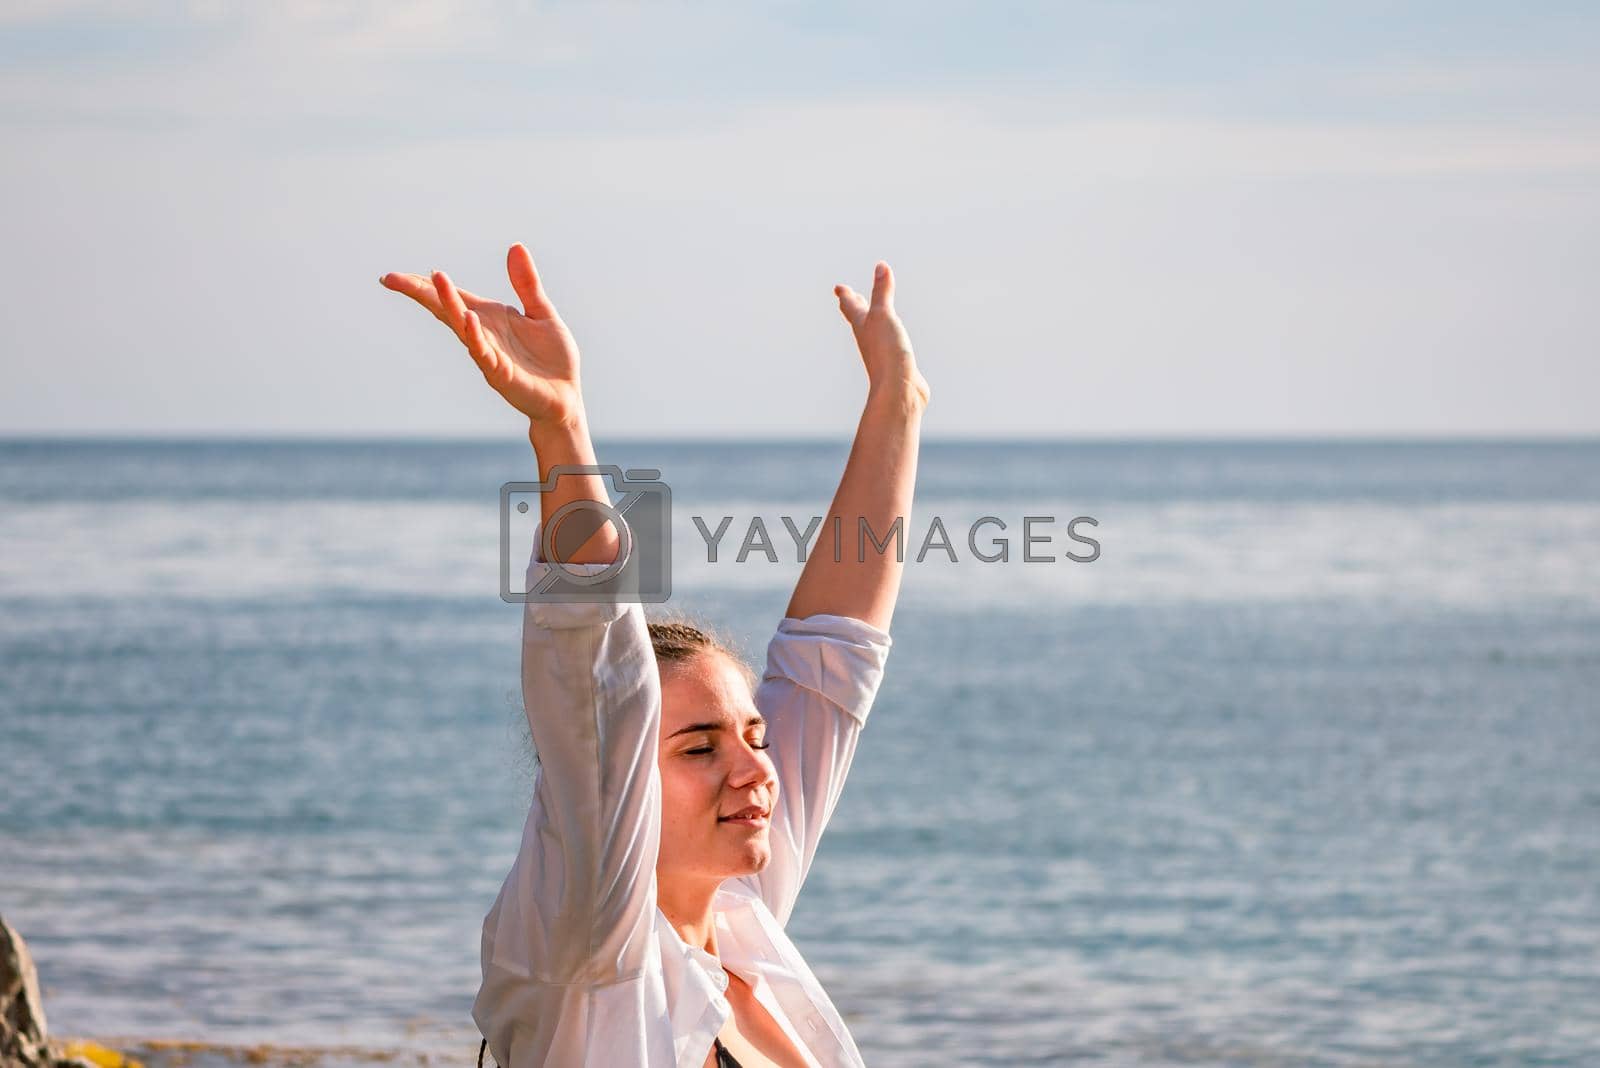 Royalty free image of The girl stands on the shore and looks at the sea. Her hands are raised up. She wears a white shirt and her hair is in a braid. by Matiunina